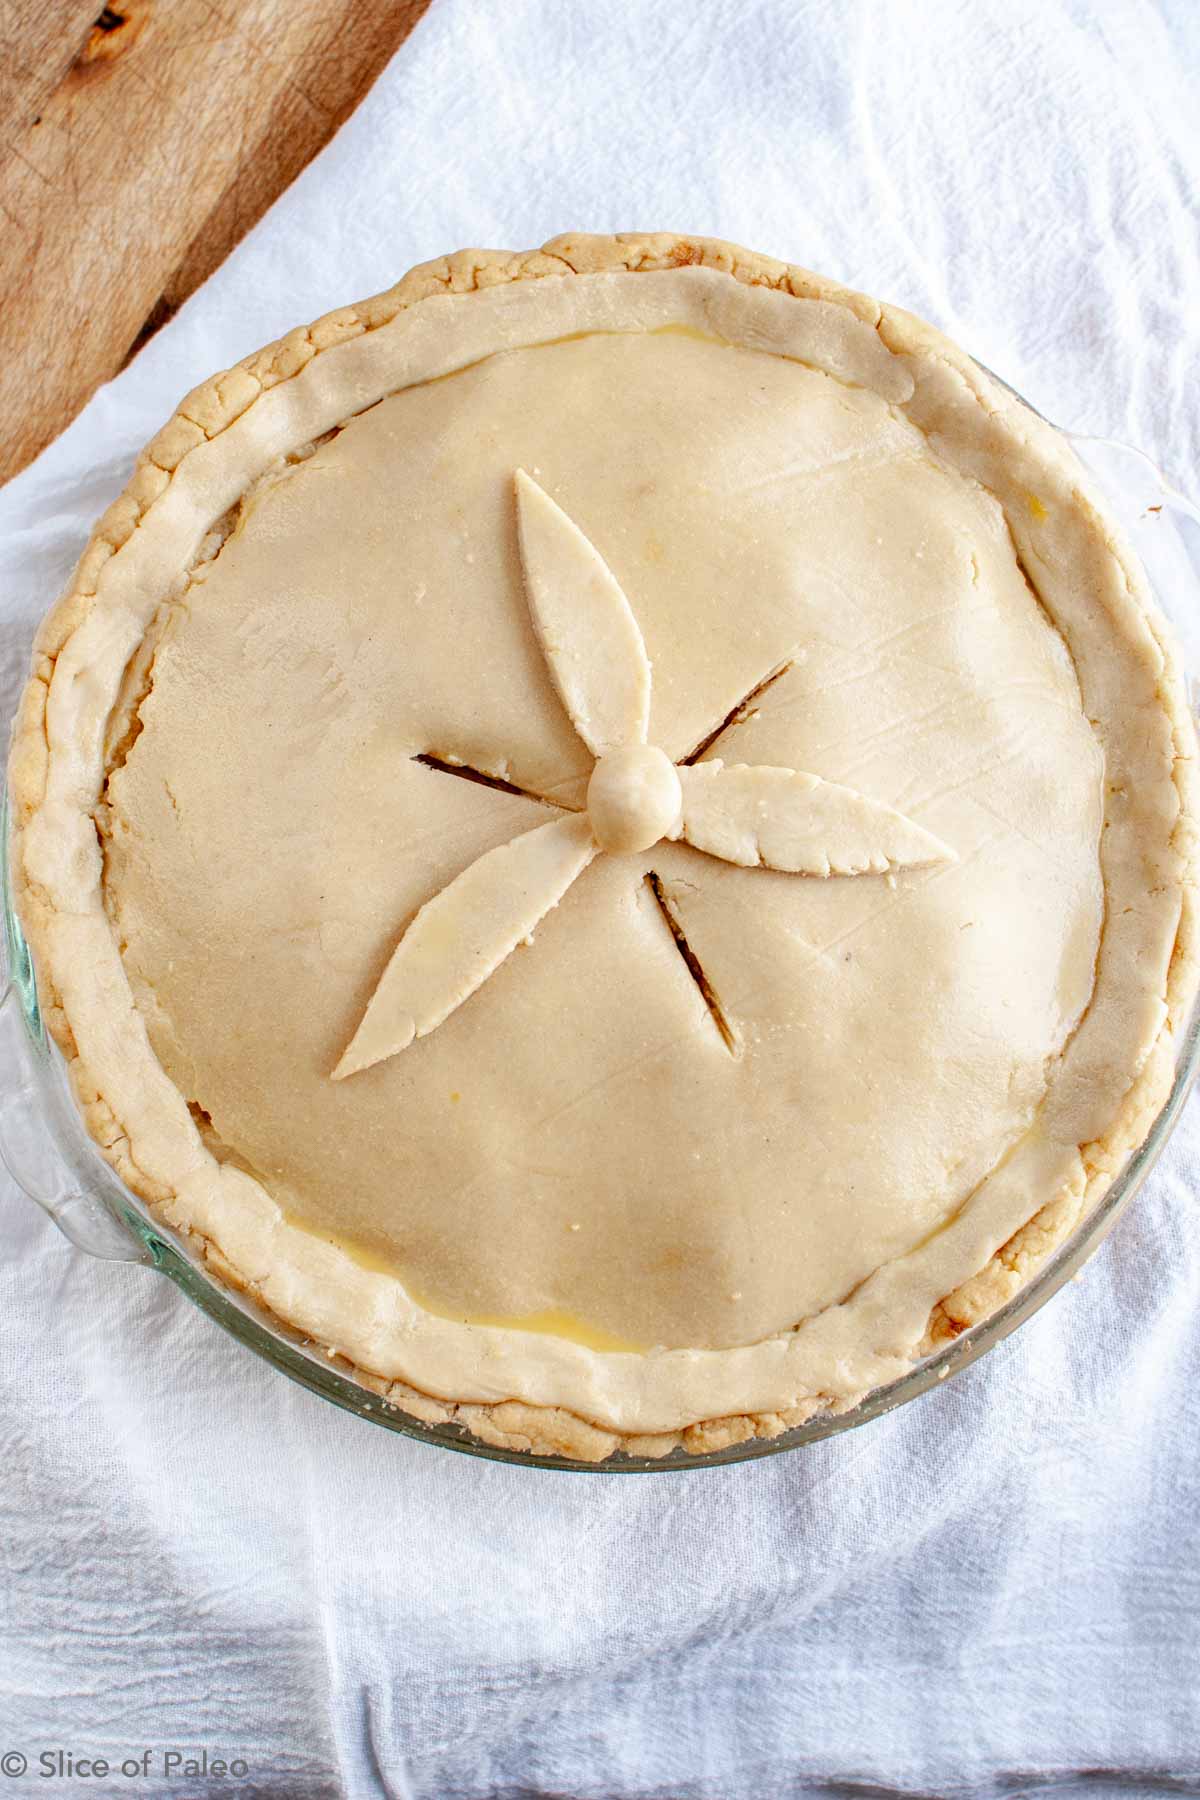 Fruit Sweetened Paleo Apple Pie with top crust ready to bake